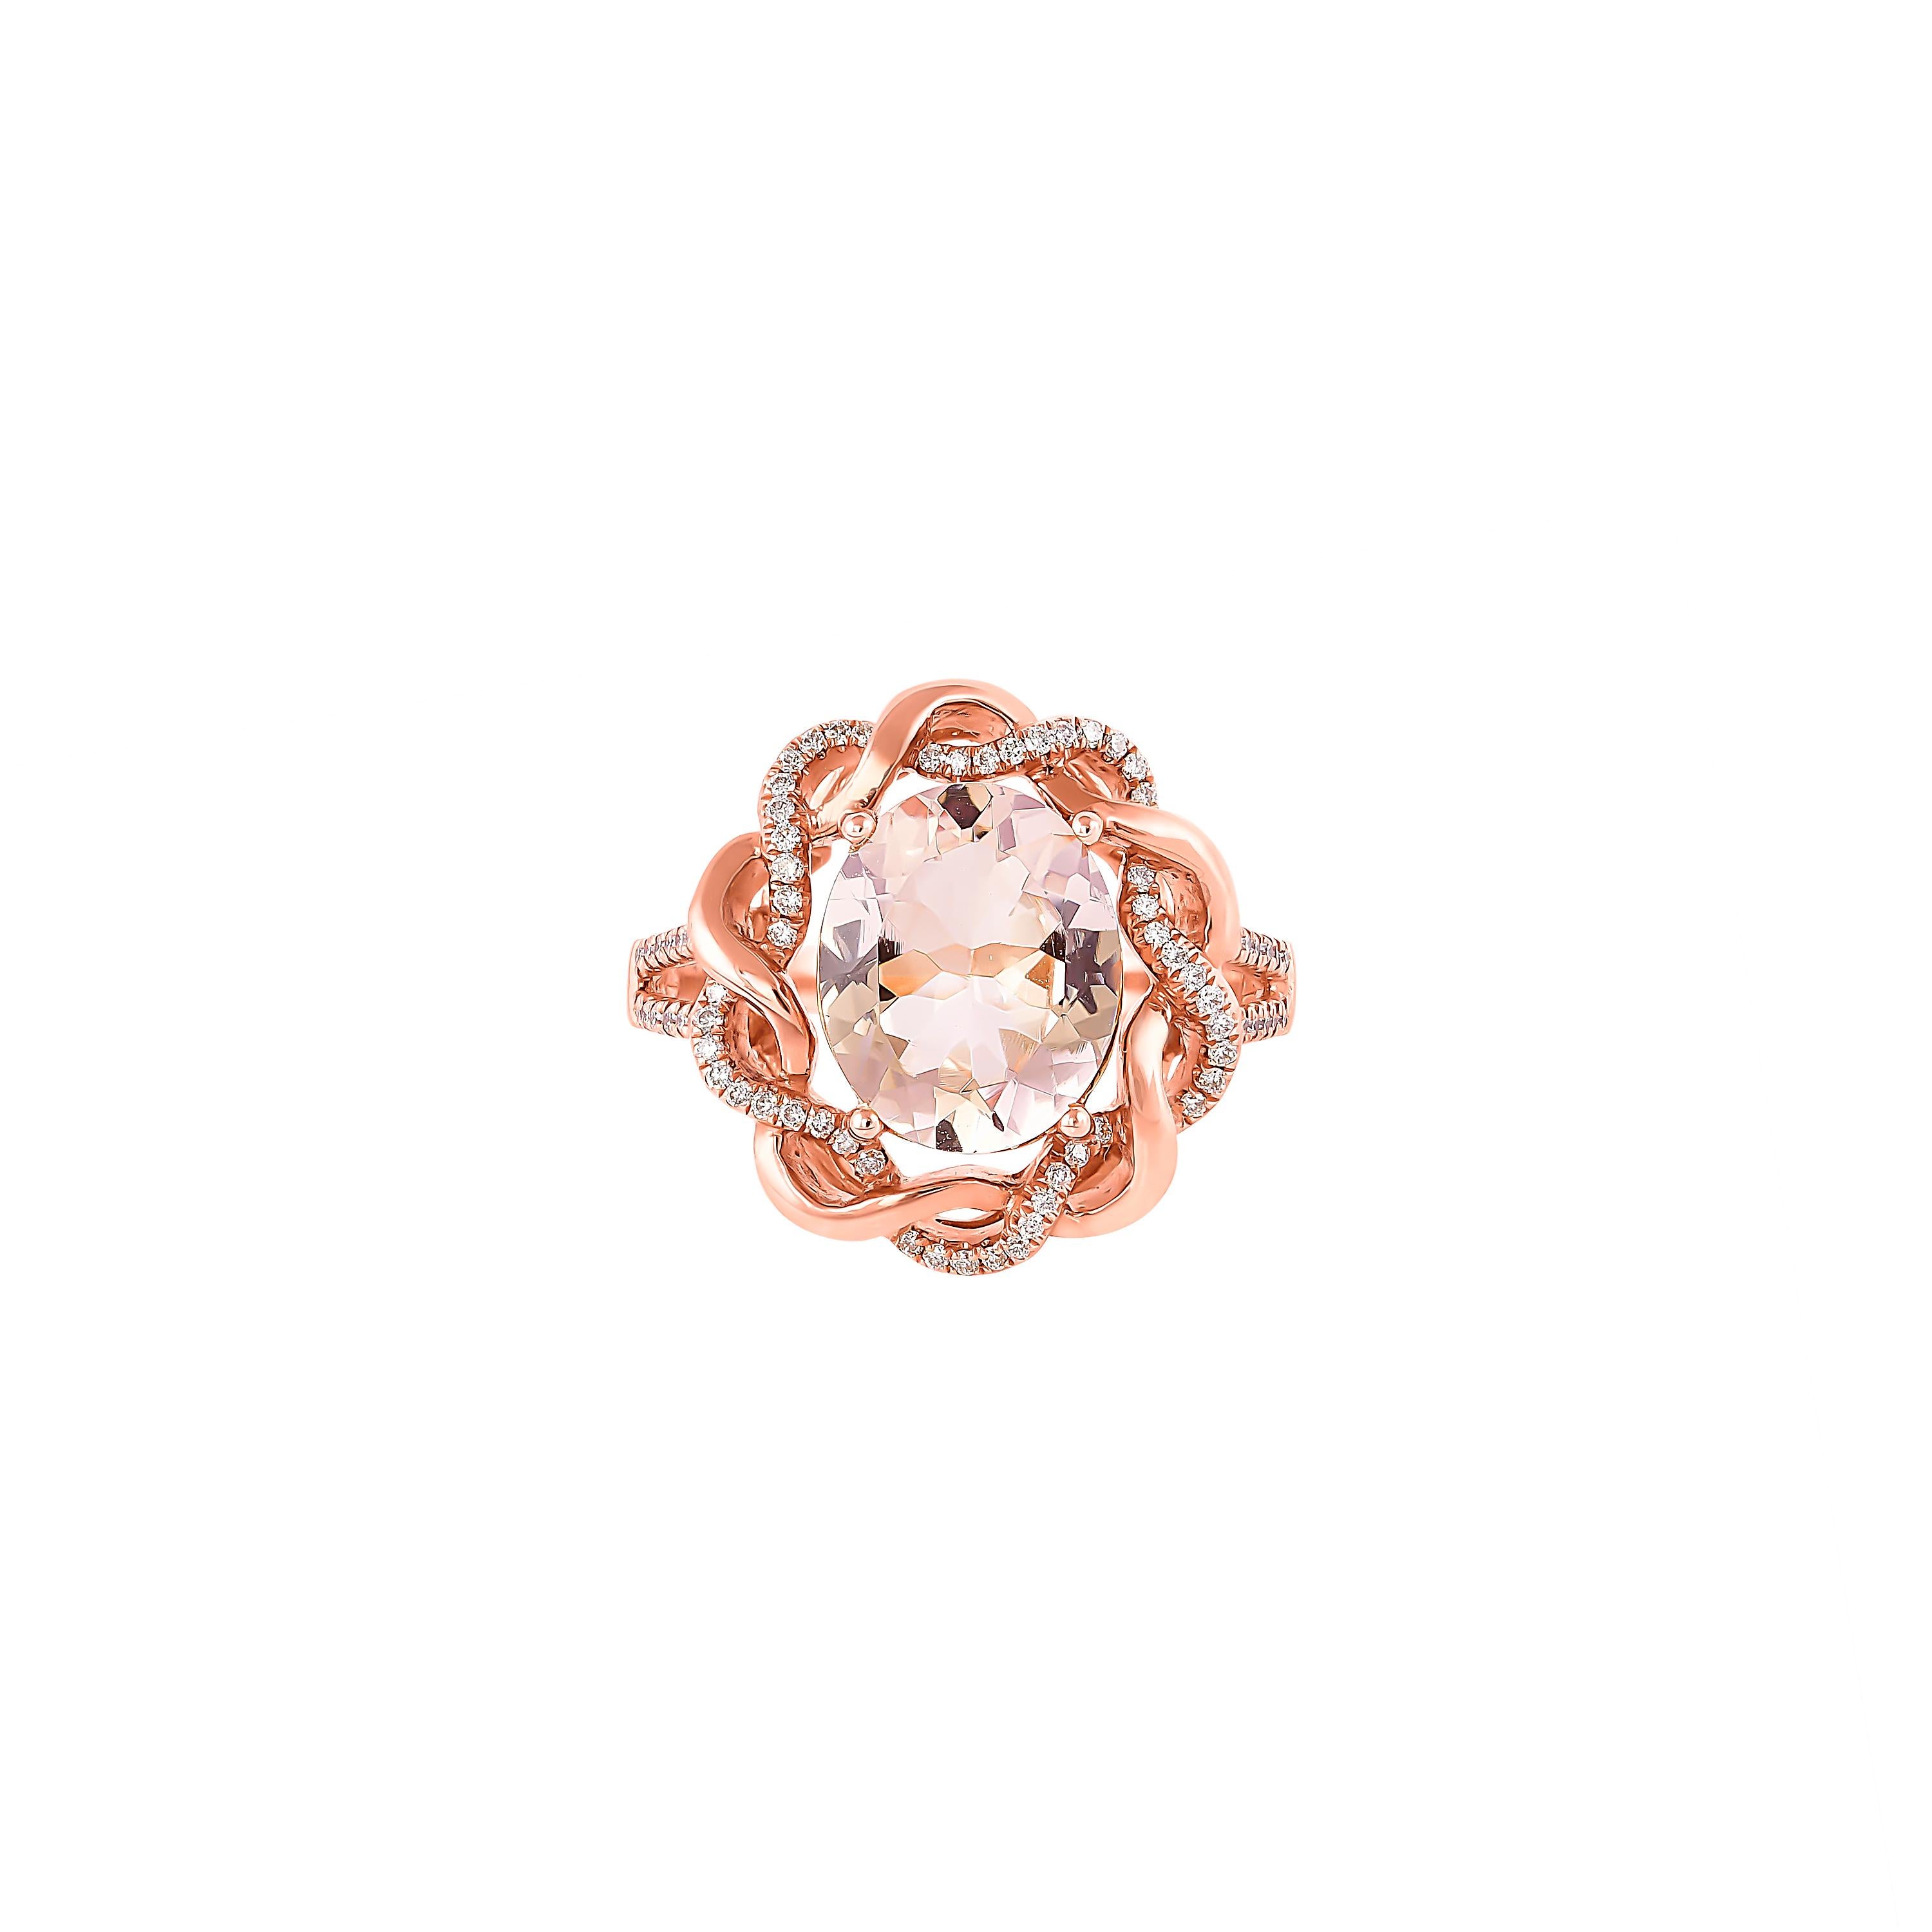 Oval Cut 2.5 Carat Morganite and Diamond Ring in 18 Karat Rose Gold For Sale